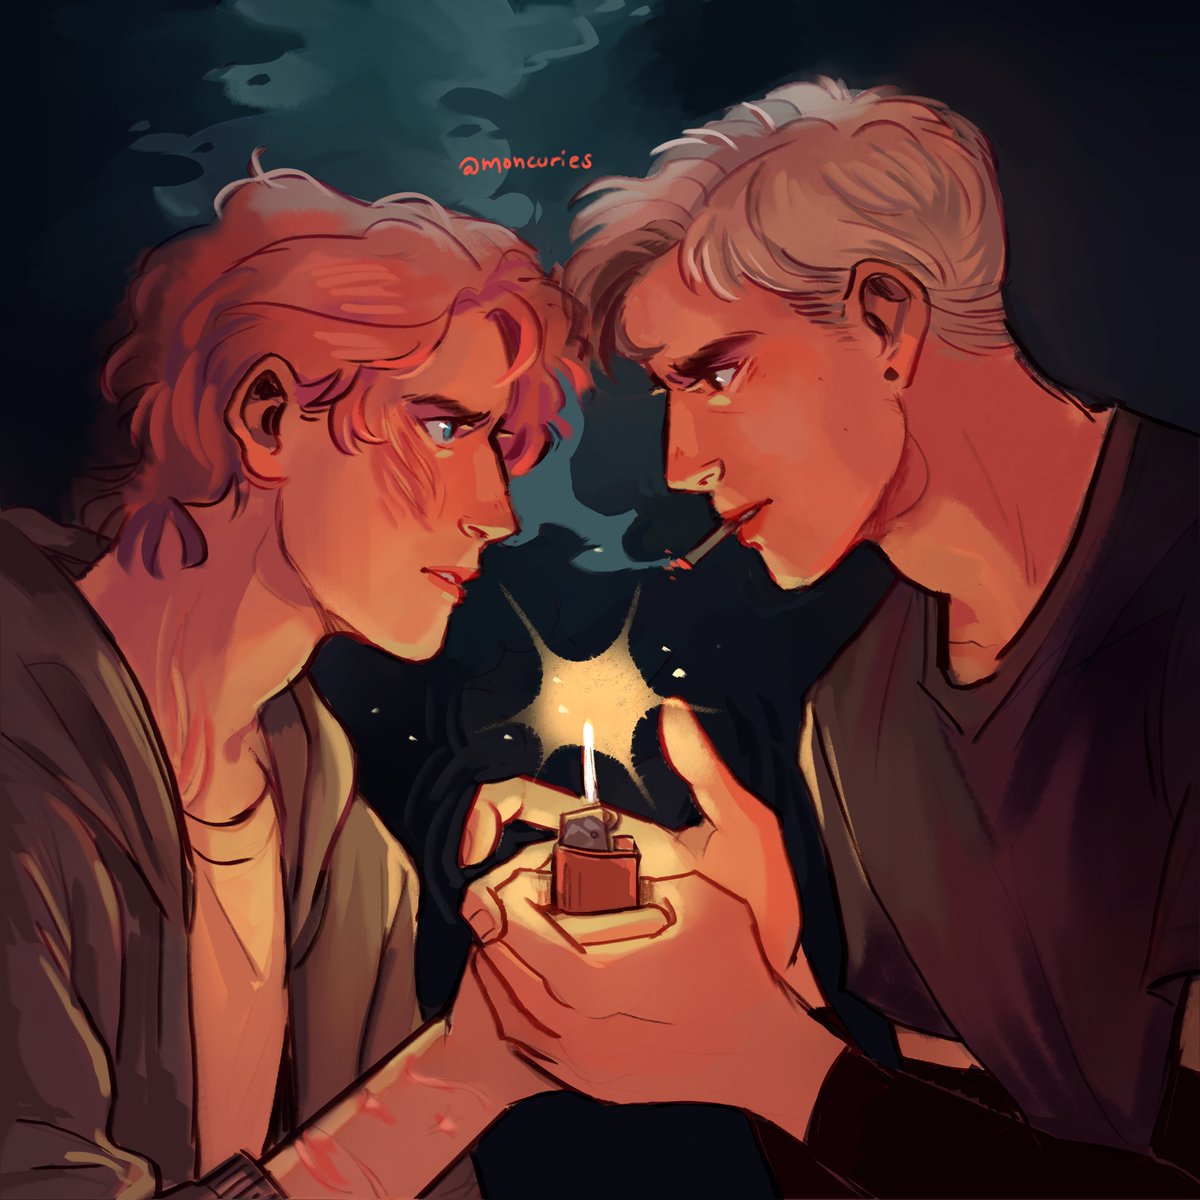 drawing these two smoking is a right of passage for aftg artists i think #aftg